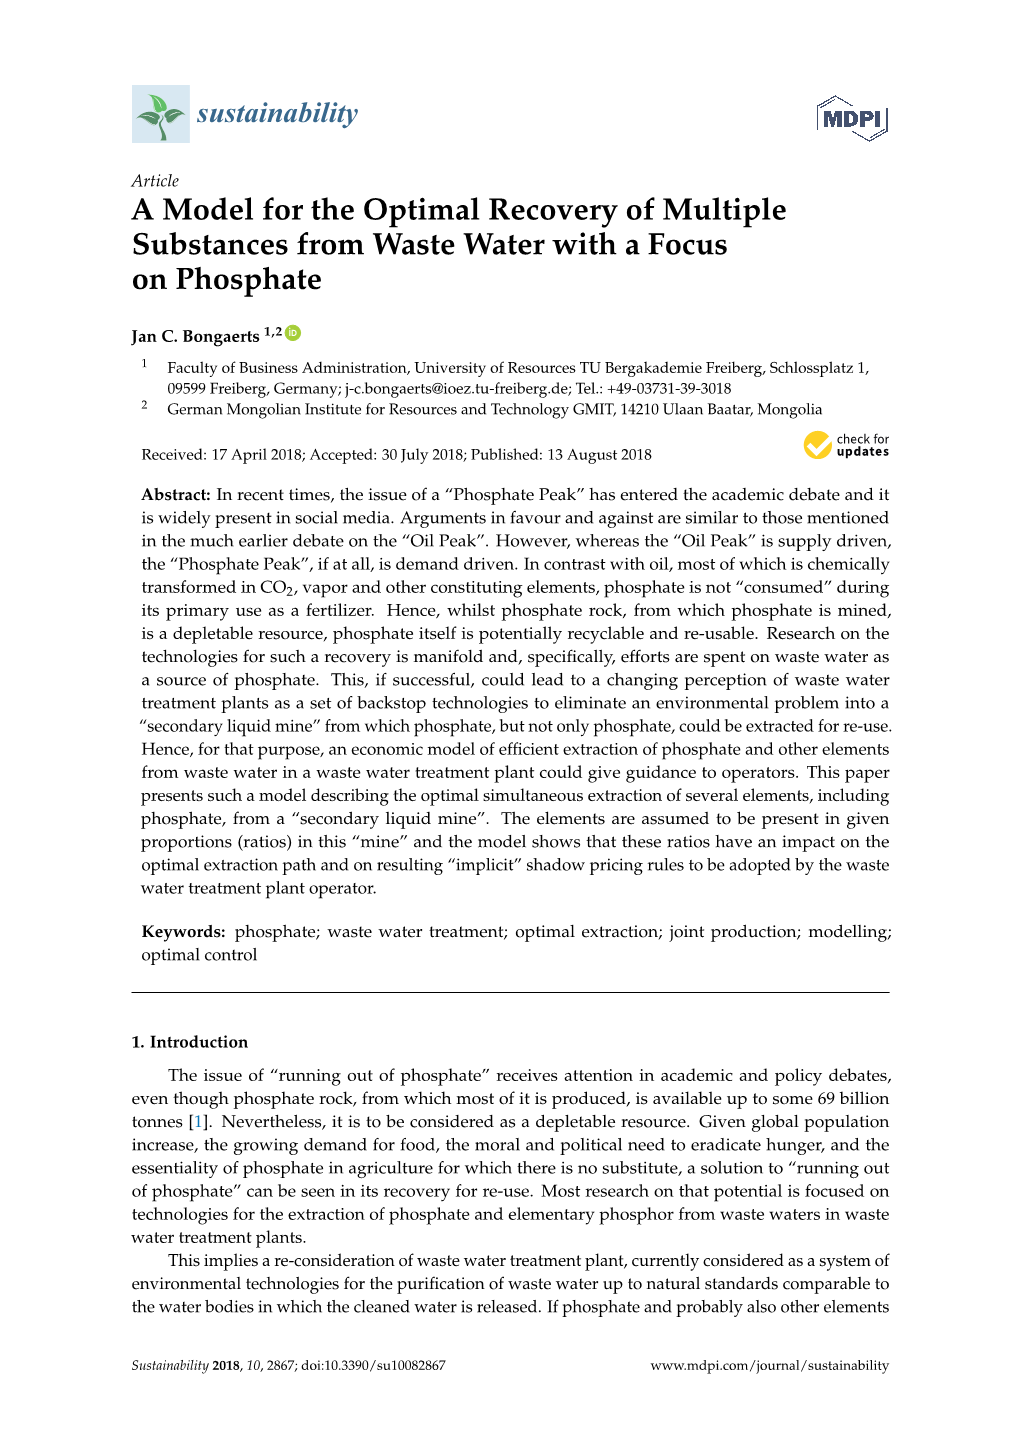 A Model for the Optimal Recovery of Multiple Substances from Waste Water with a Focus on Phosphate